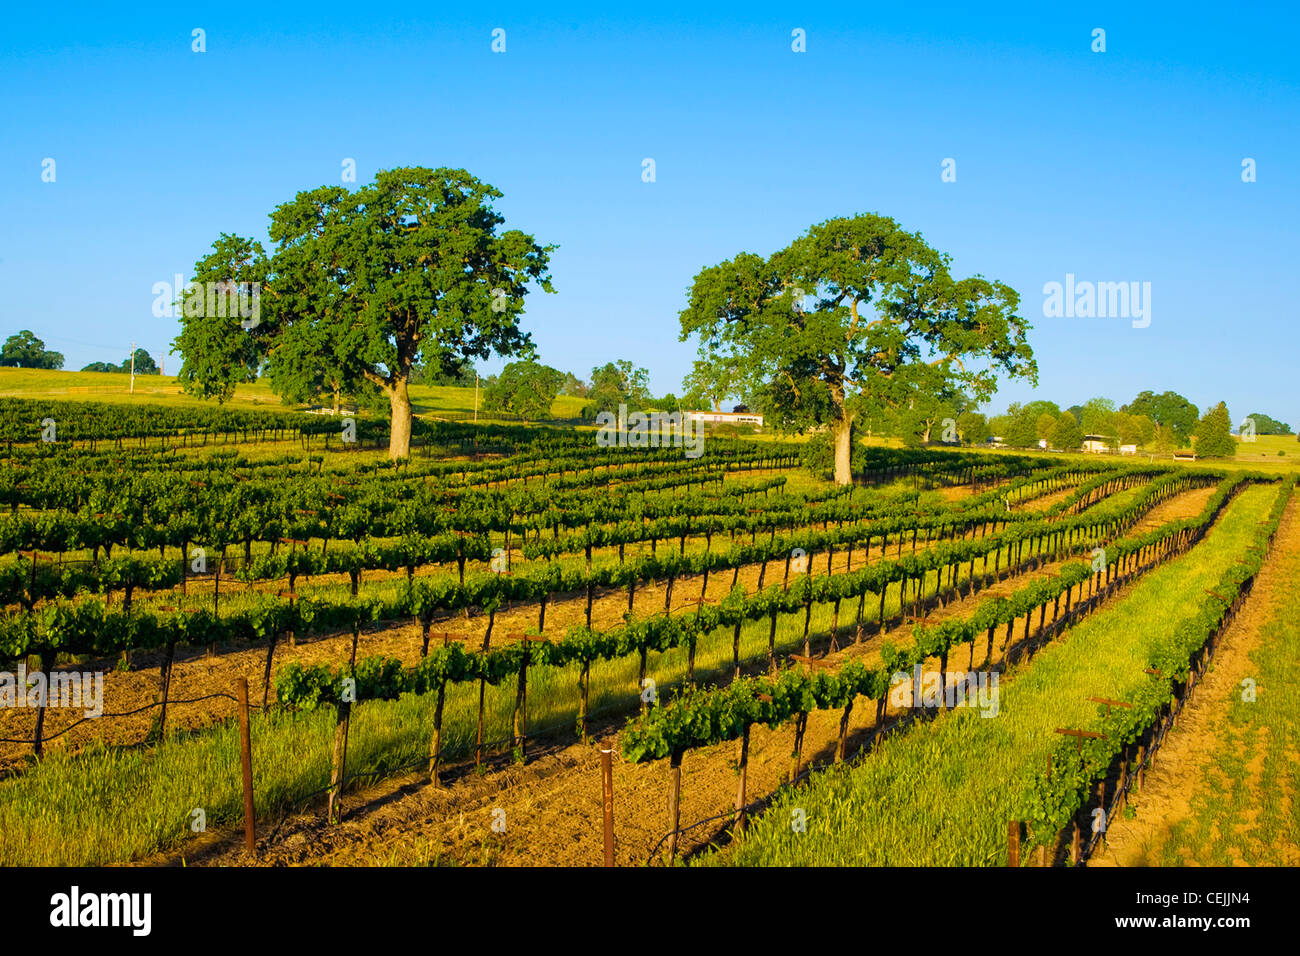 Agriculture - Rolling mid-summer wine grape vineyard with oak trees on the hillsides / near Clements, California, USA. Stock Photo